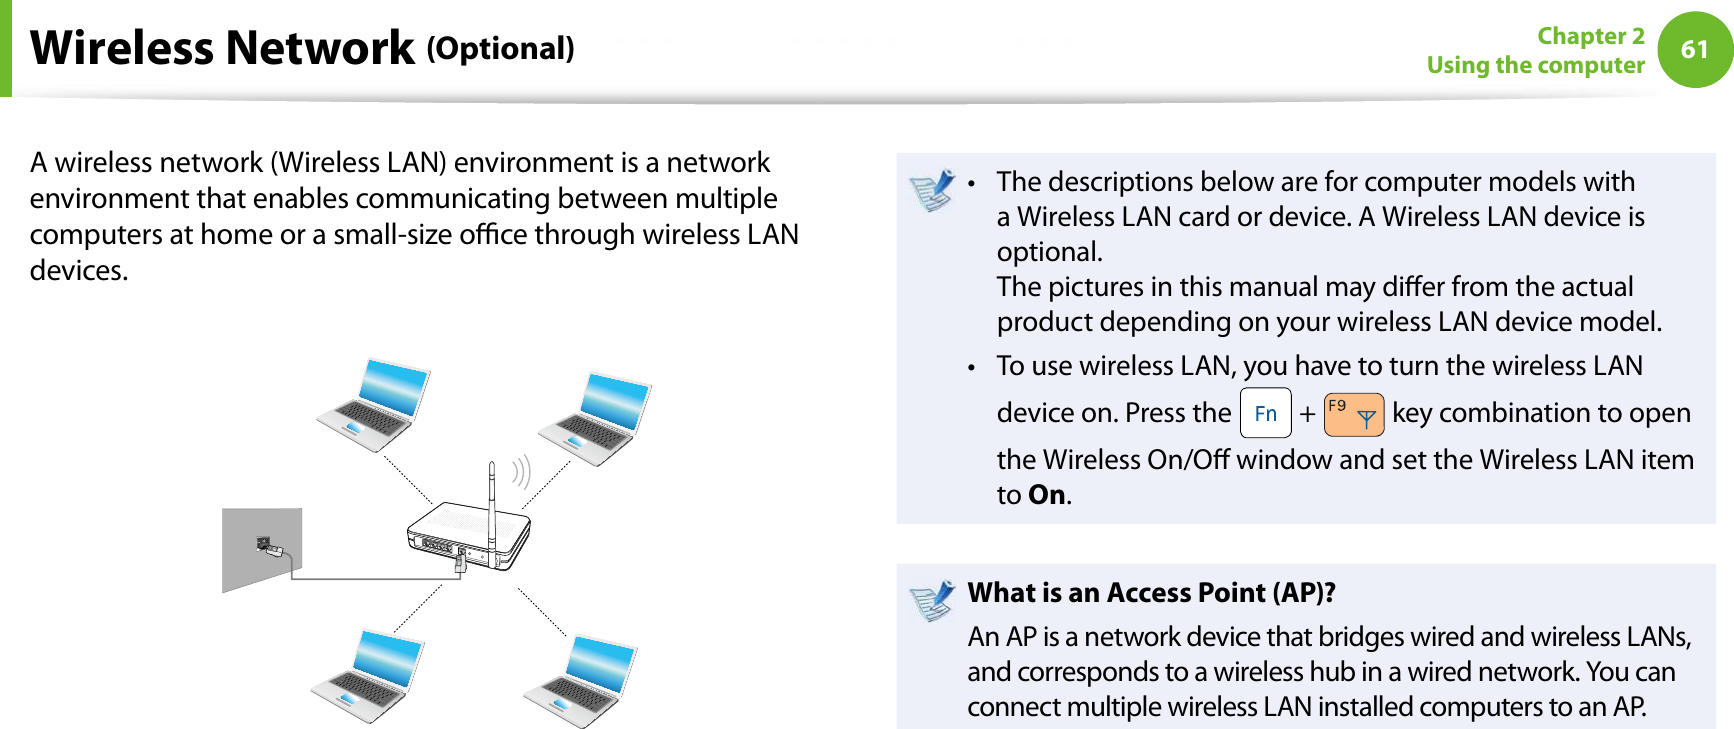 61Chapter 2Using the computerA wireless network (Wireless LAN) environment is a network environment that enables communicating between multiple computers at home or a small-size oce through wireless LAN devices.The descriptions below are for computer models with ta Wireless LAN card or device. A Wireless LAN device is optional.The pictures in this manual may dier from the actual product depending on your wireless LAN device model.To use wireless LAN, you have to turn the wireless LAN tdevice on. Press the   +   key combination to open the Wireless On/O window and set the Wireless LAN item to On.What is an Access Point (AP)?An AP is a network device that bridges wired and wireless LANs, and corresponds to a wireless hub in a wired network. You can connect multiple wireless LAN installed computers to an AP.Wireless Network (Optional)